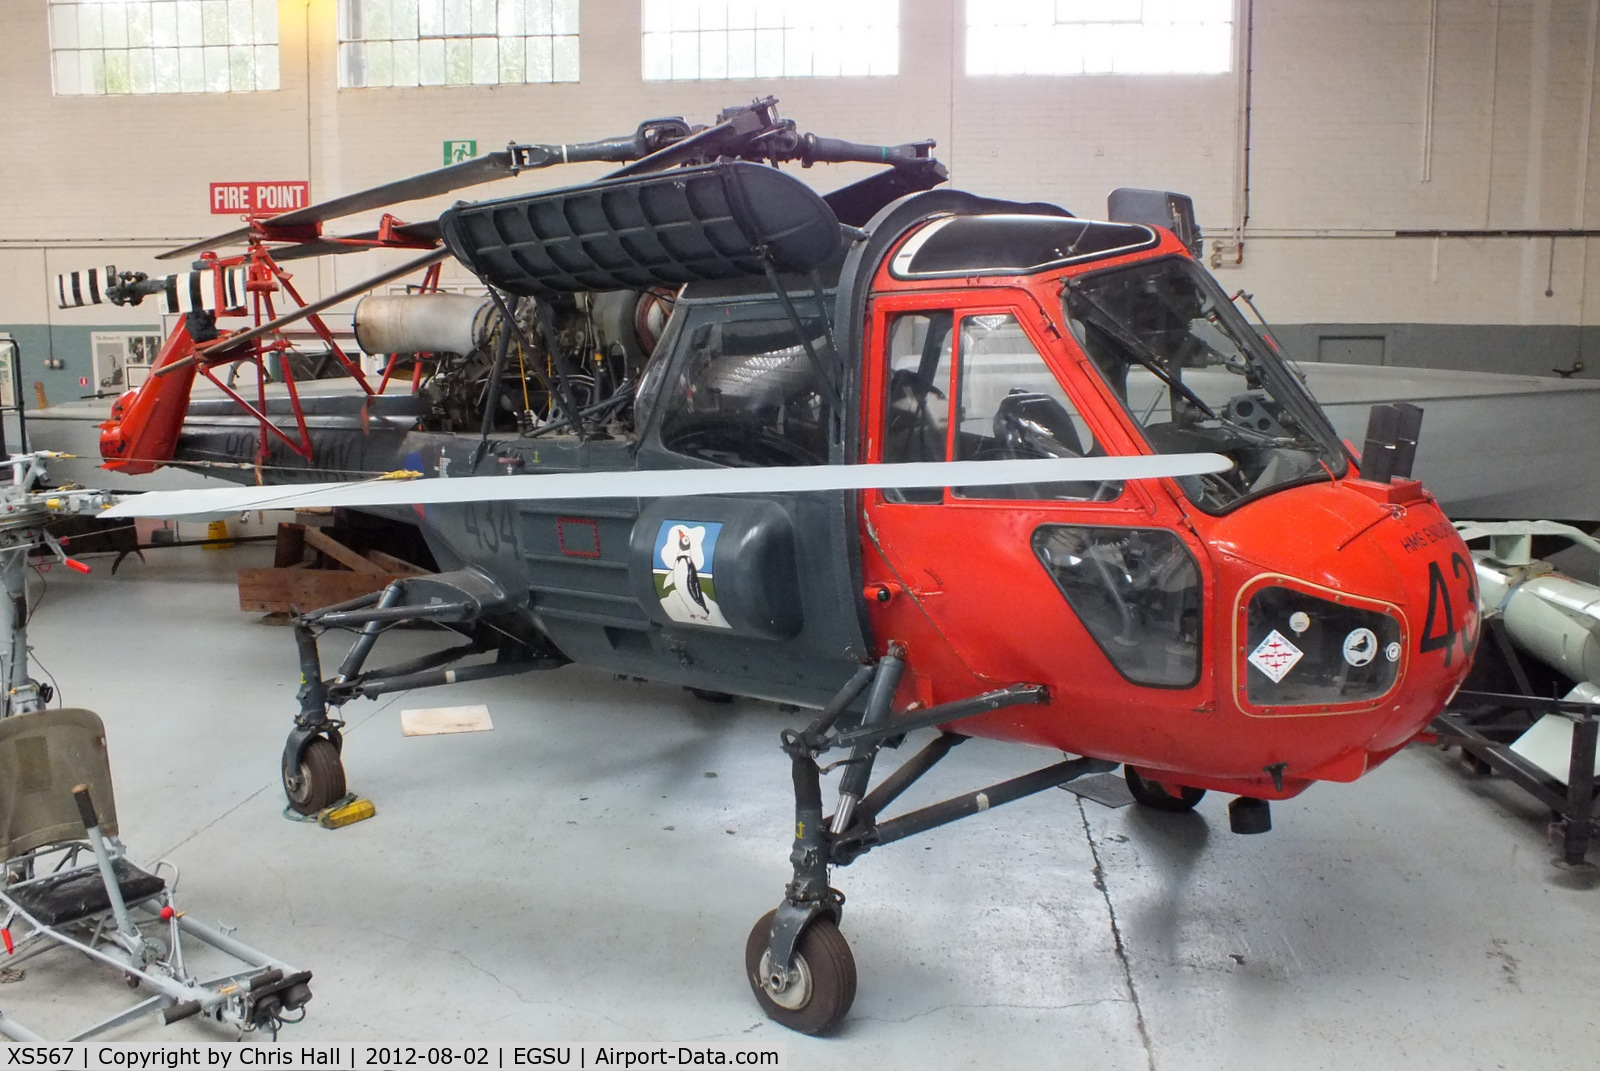 XS567, 1964 Westland Wasp HAS.1 C/N F9578, Served on HMS Endurance from 1976-1982 before being retired, on display in Hangar 5 - The Maritime Collection at the IWM Duxford